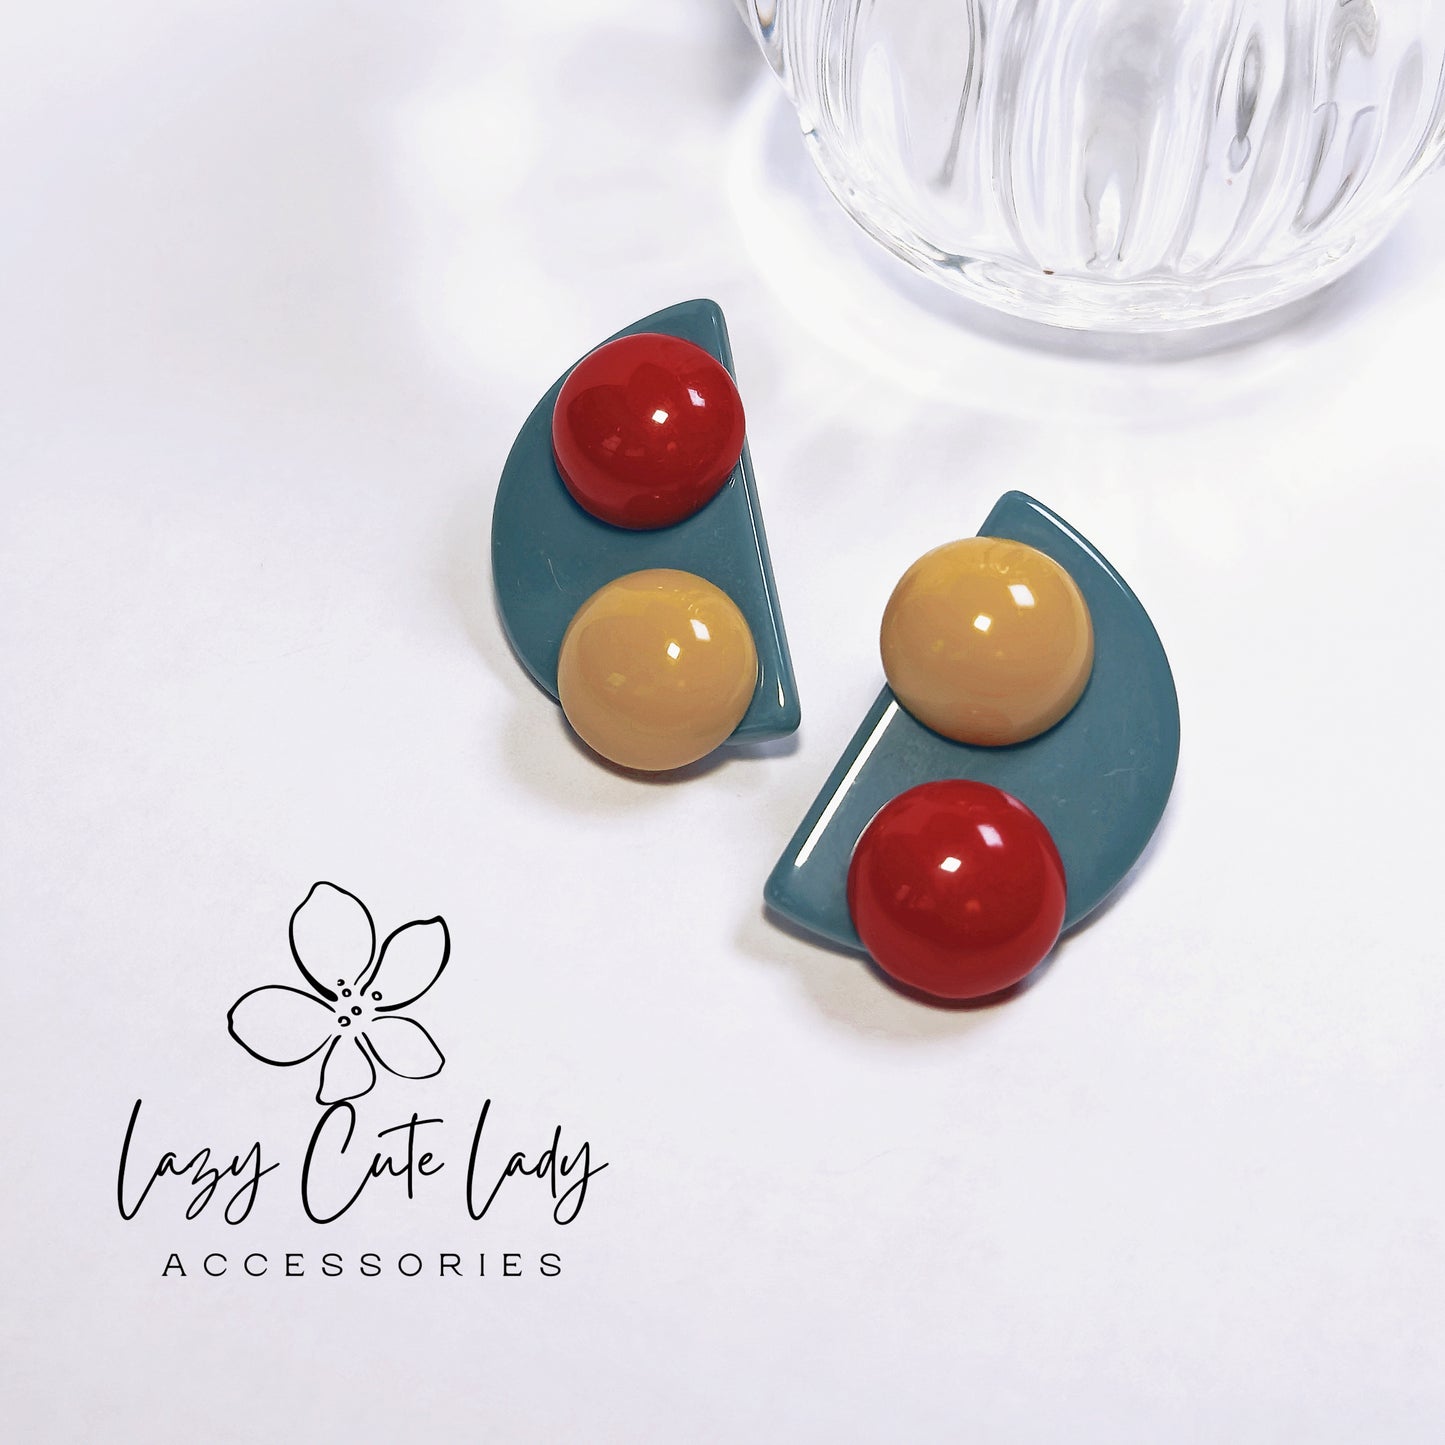 Vintage Color-Block Earrings with Navy, Yellow, and Red Accents